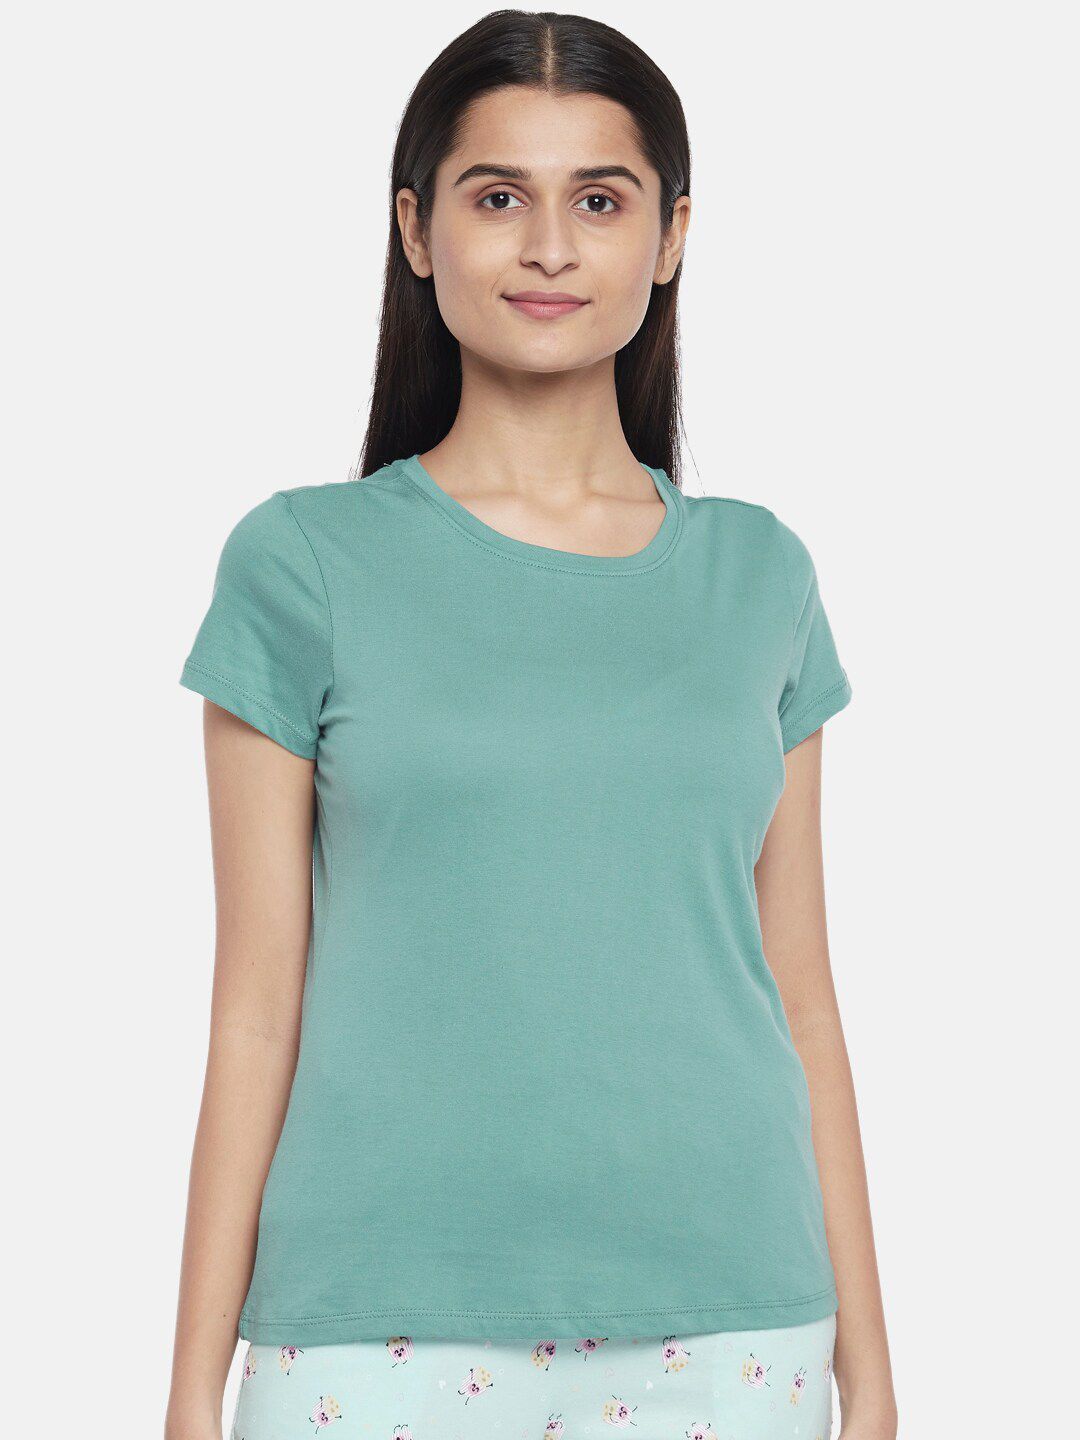 Dreamz by Pantaloons Green Pure Cotton Regular Lounge tshirt Price in India